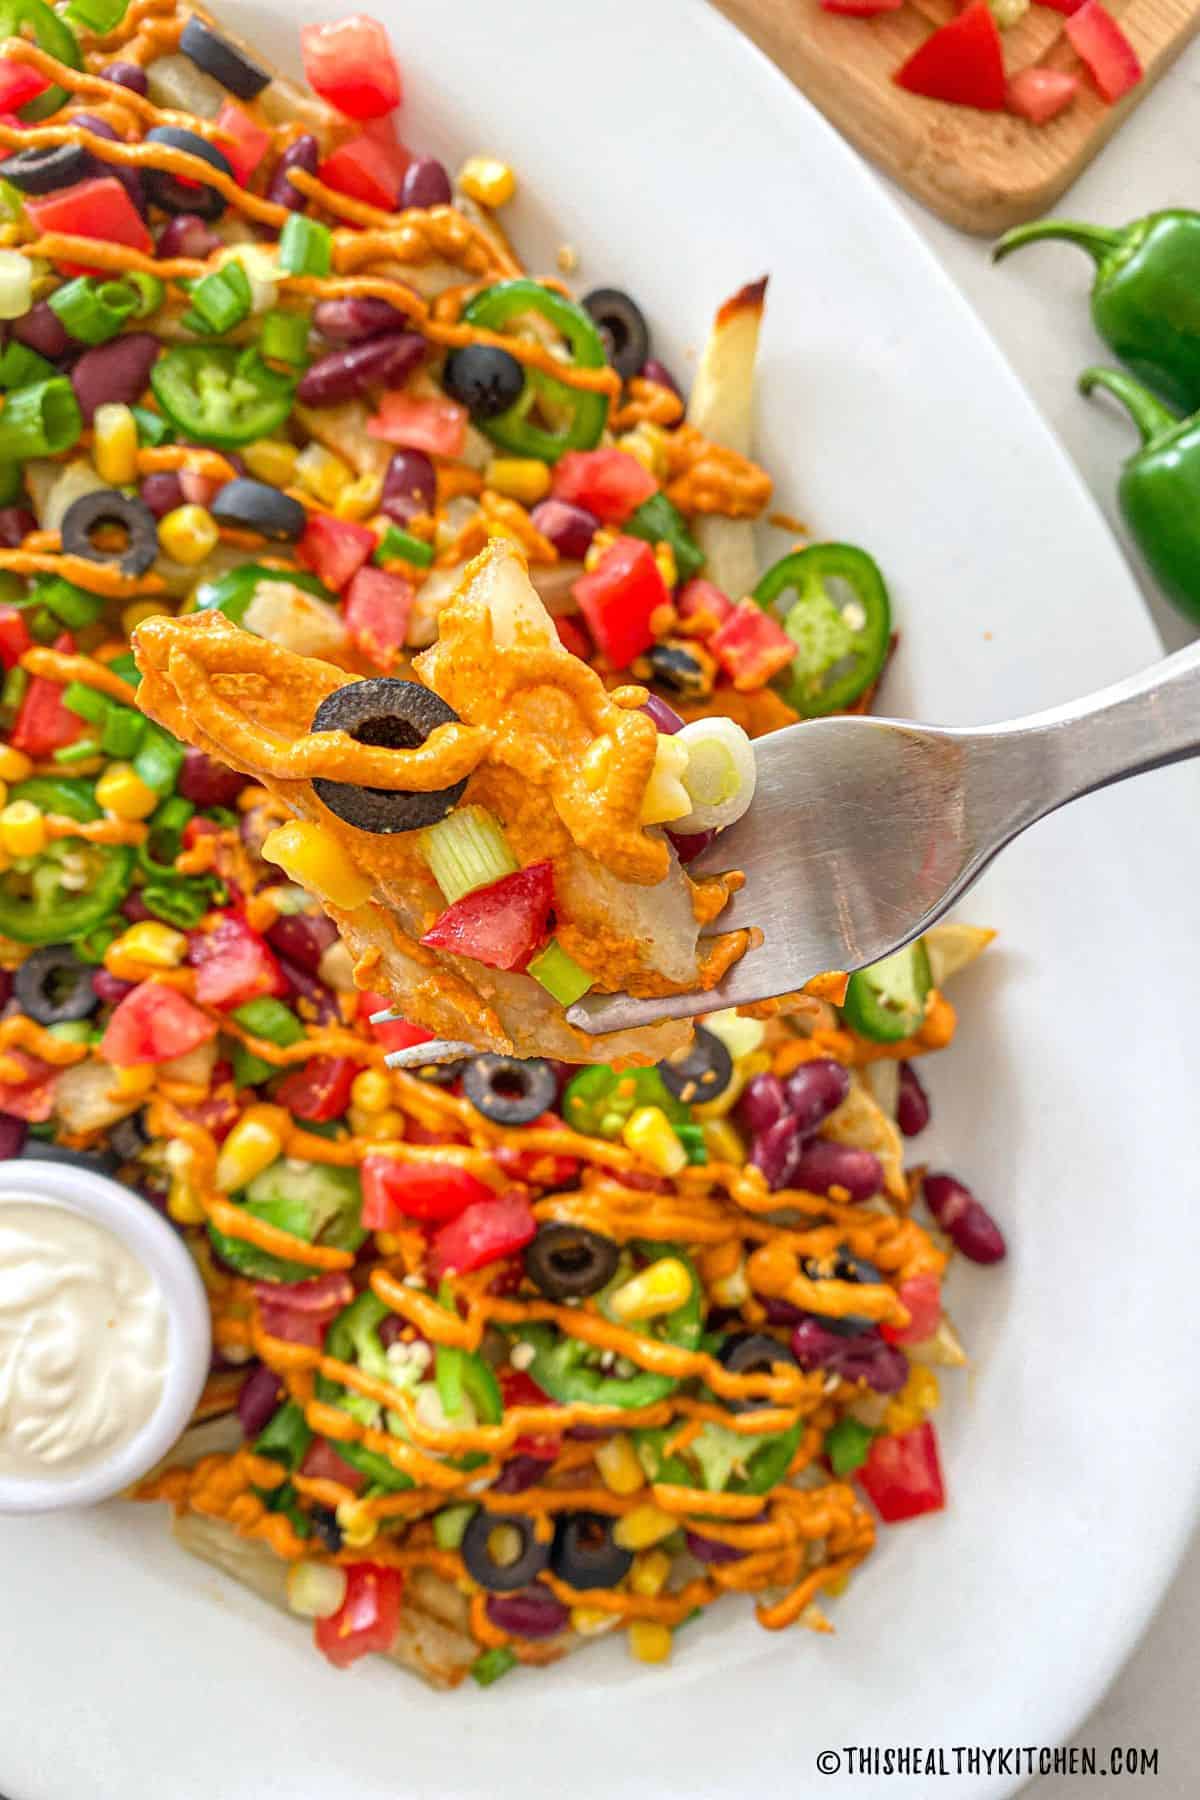 Fork full of french fries with cheese sauce and nacho toppings on them.